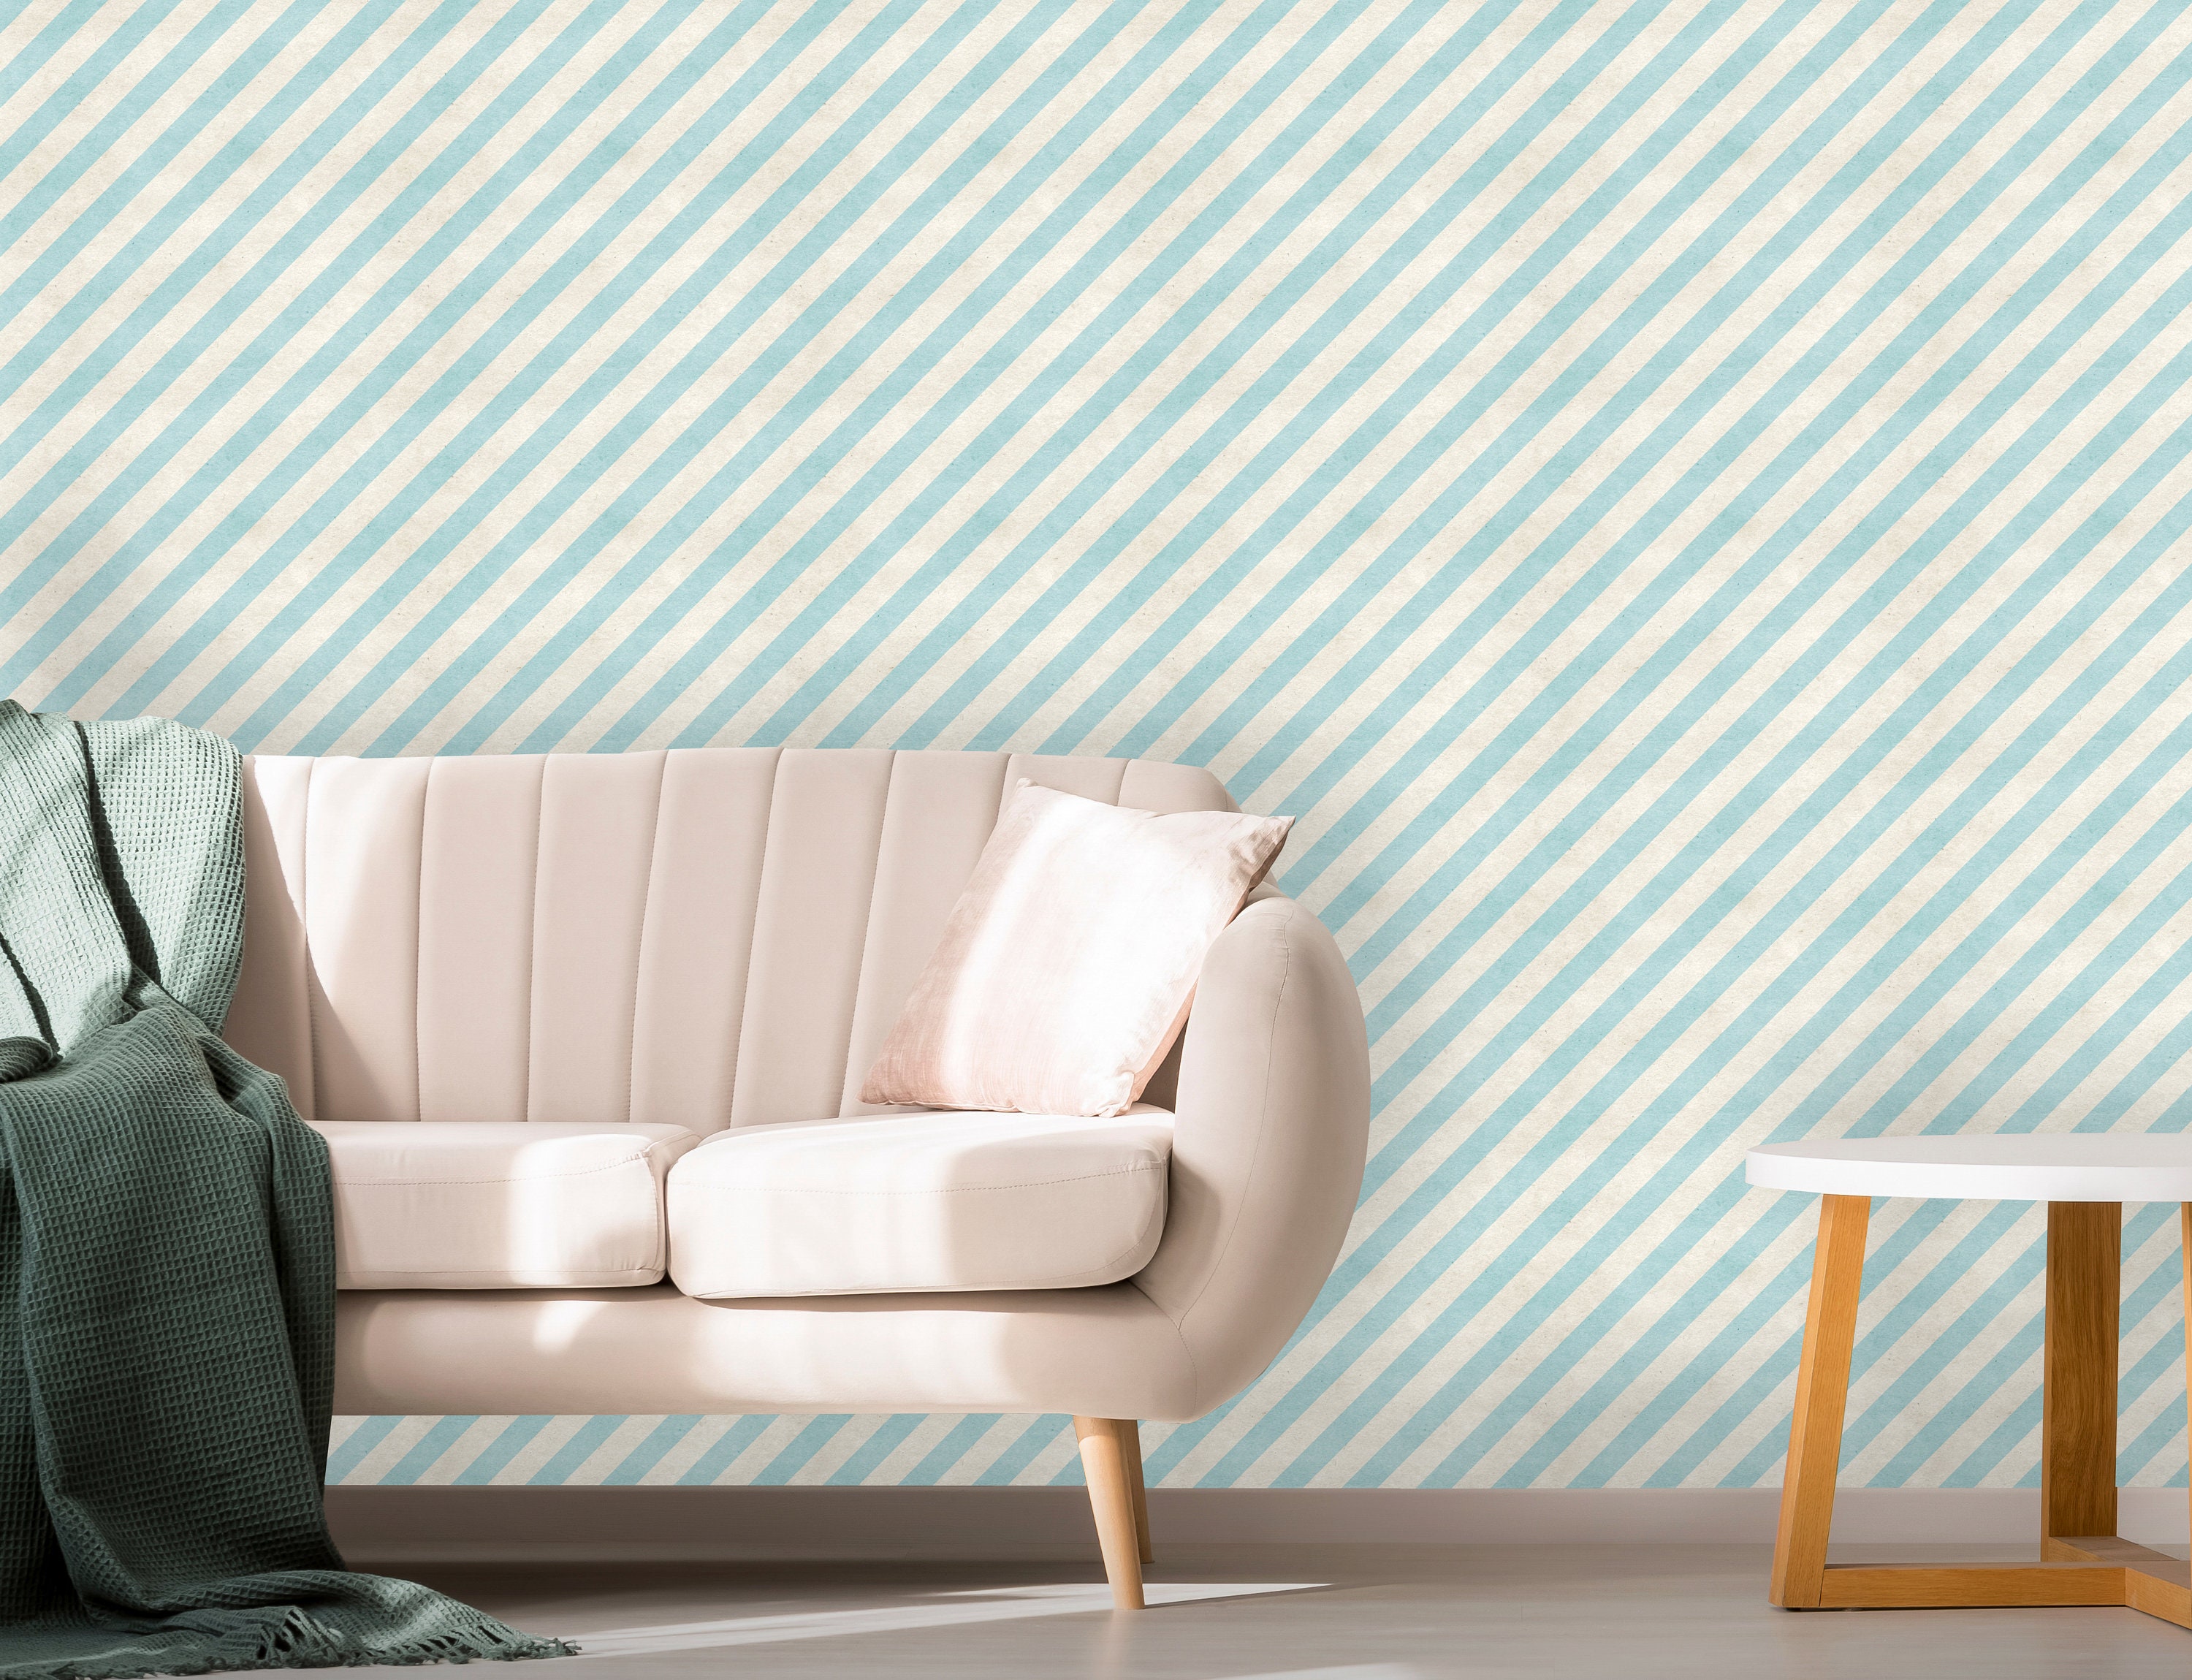 Removable Wallpaper Peel and Stick Geometric Wallpaper - Etsy